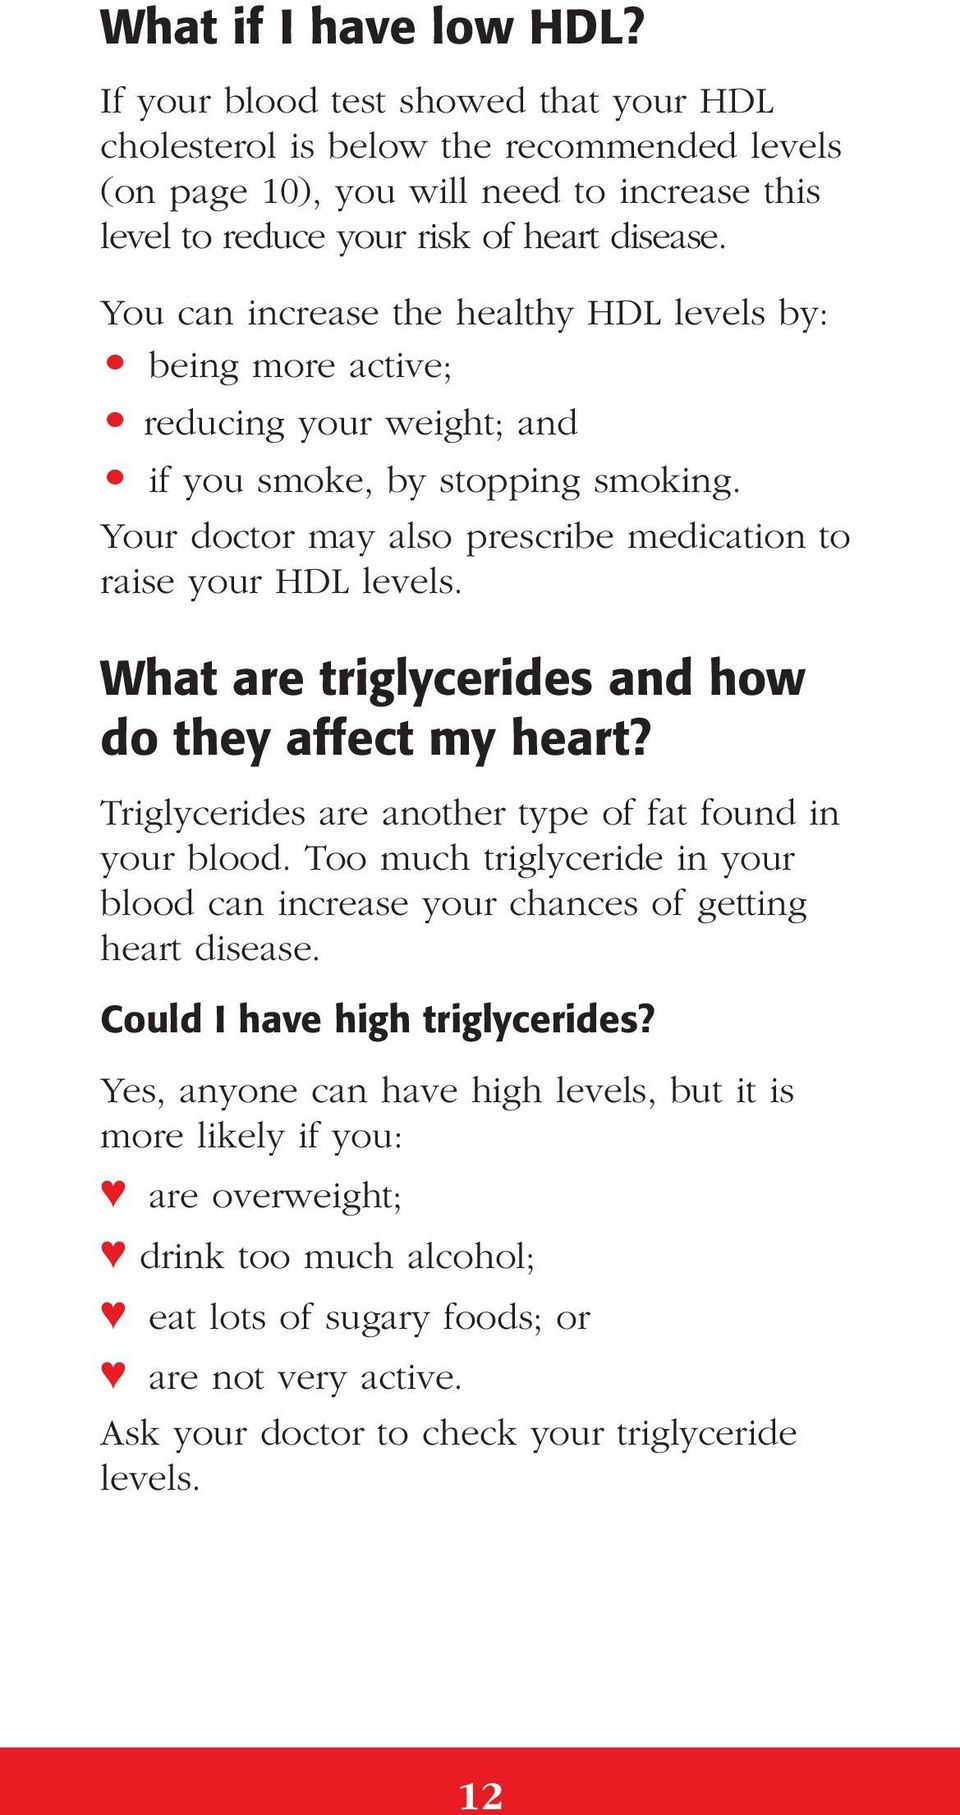 What are triglycerides and how do they affect my heart? Triglycerides are another type of fat found in your blood.